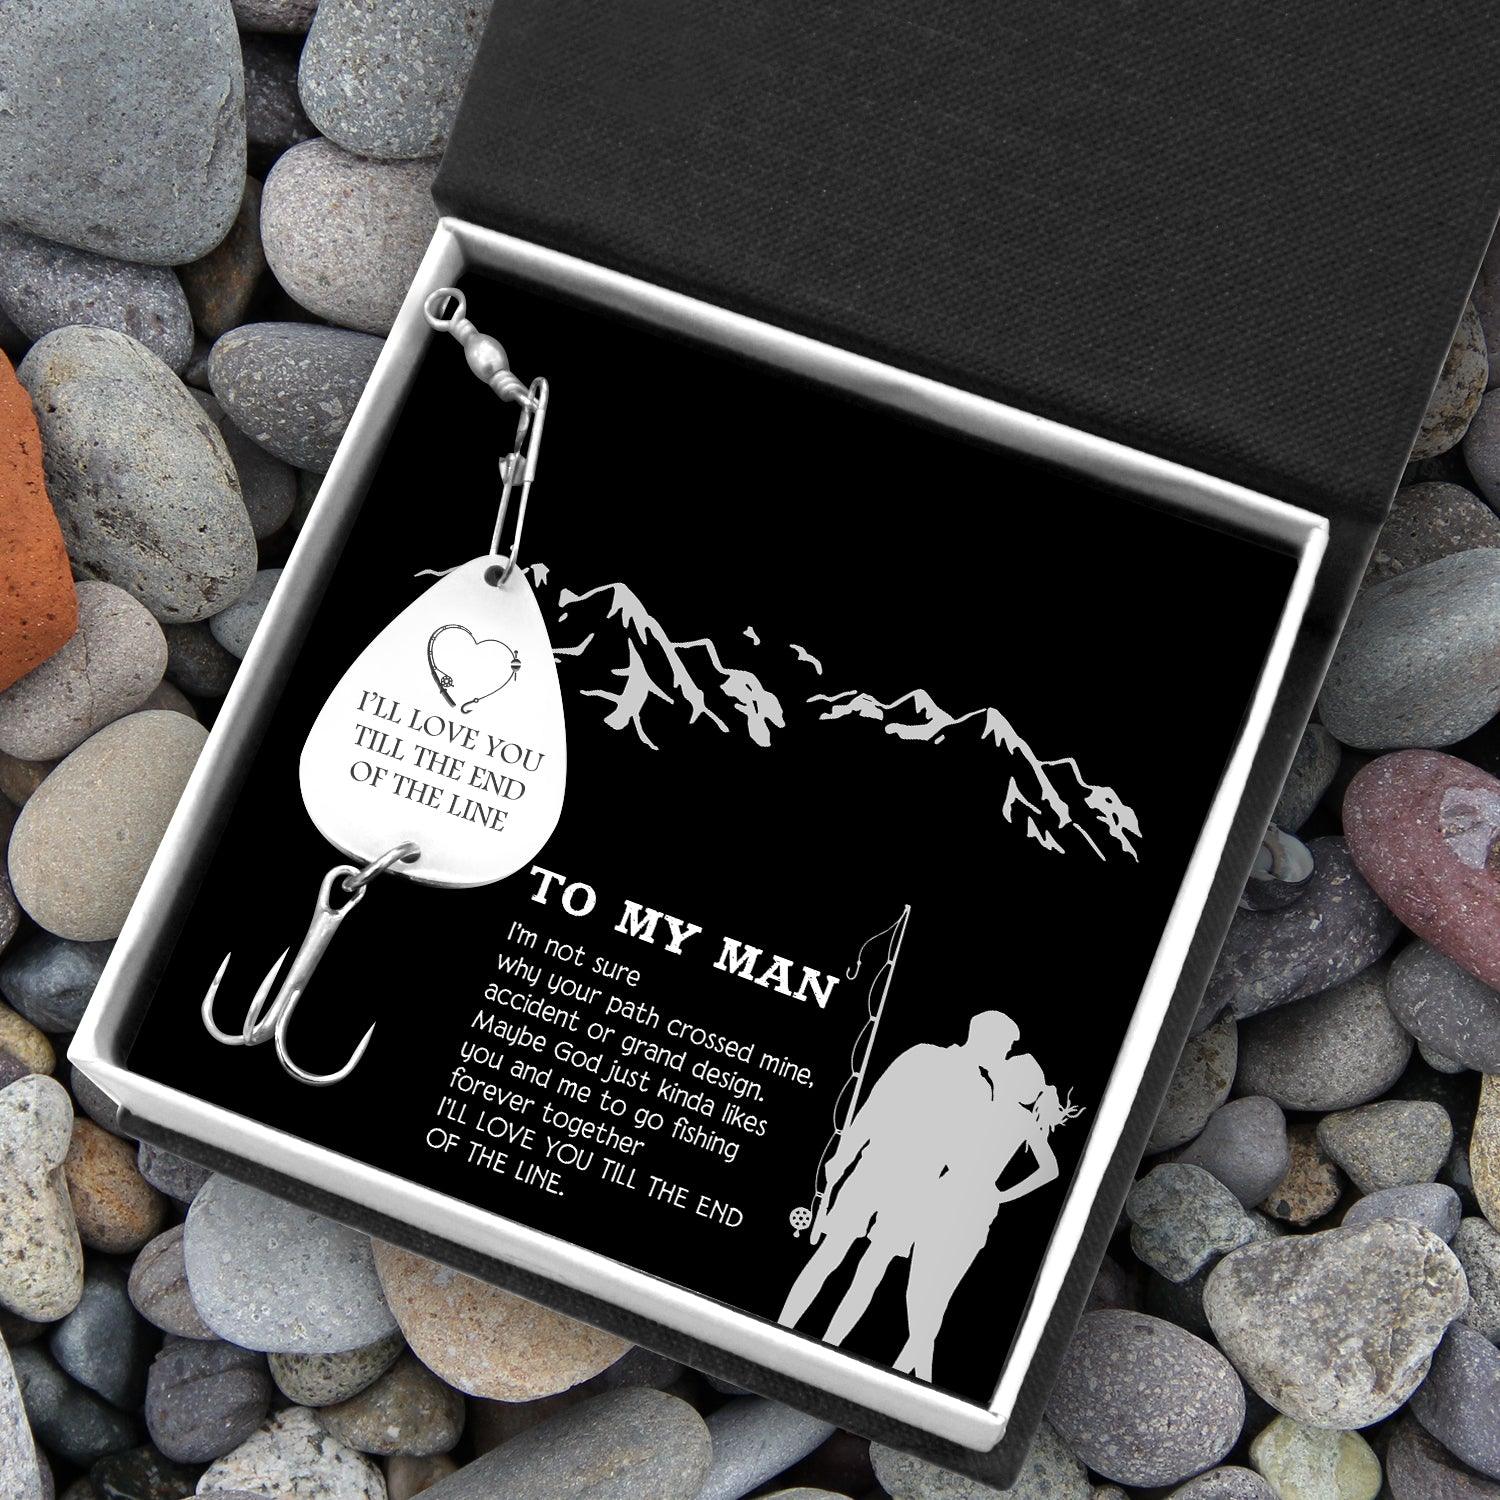 Engraved Fishing Hook - To My Man - Maybe God Just Kinda Likes You And Me To Go Fishing Forever Together - Augfa26005 - Gifts Holder